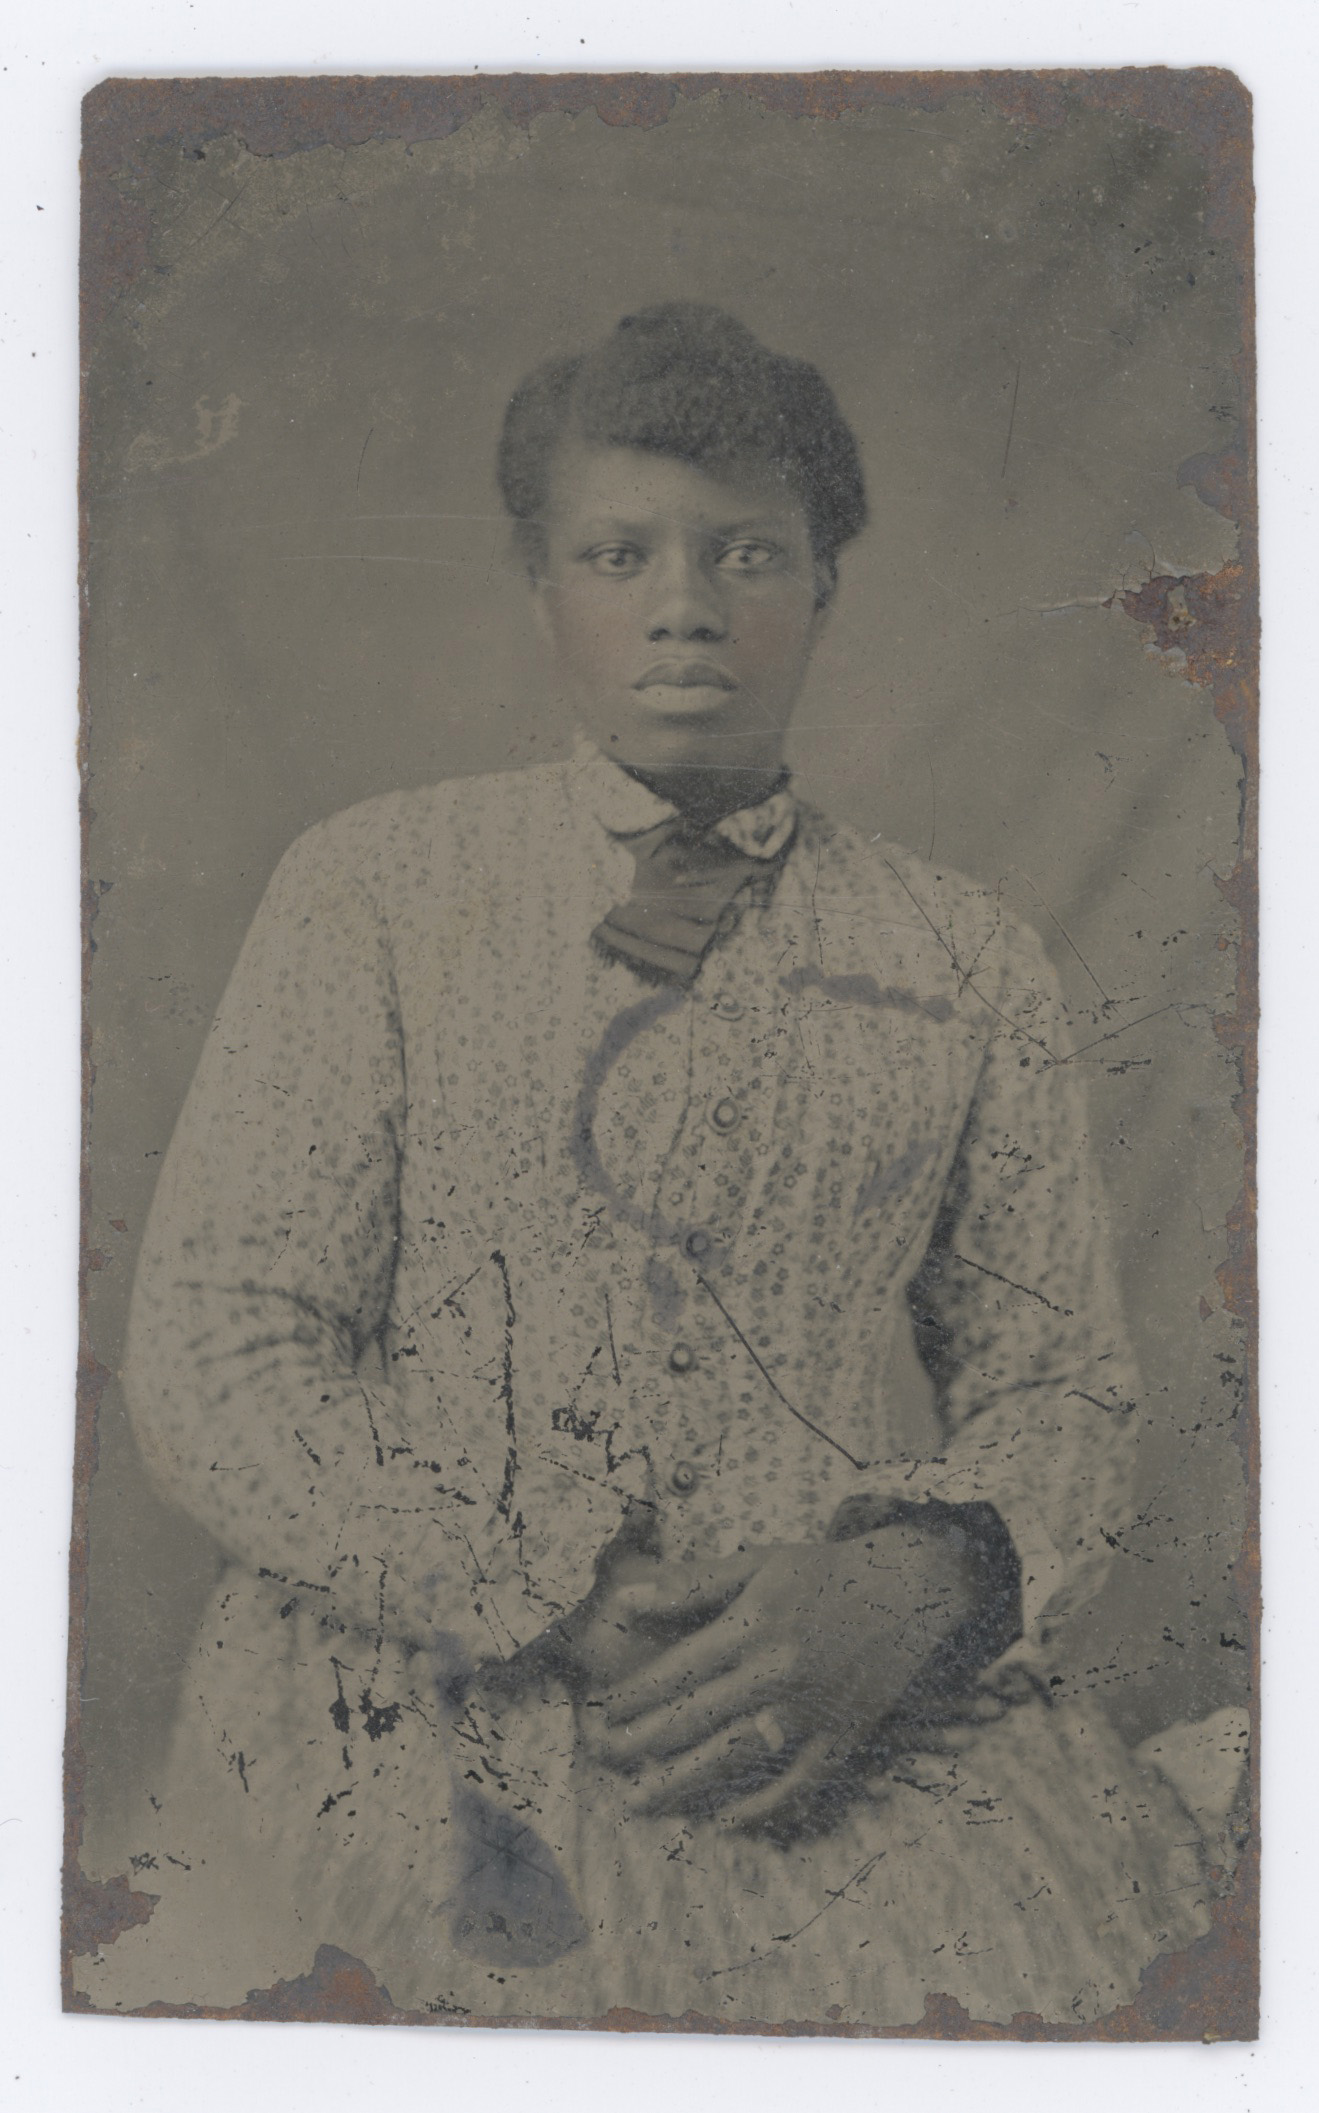 Researching 19th-century photographs like this were an entry point into digital projects for Allison Robinson.